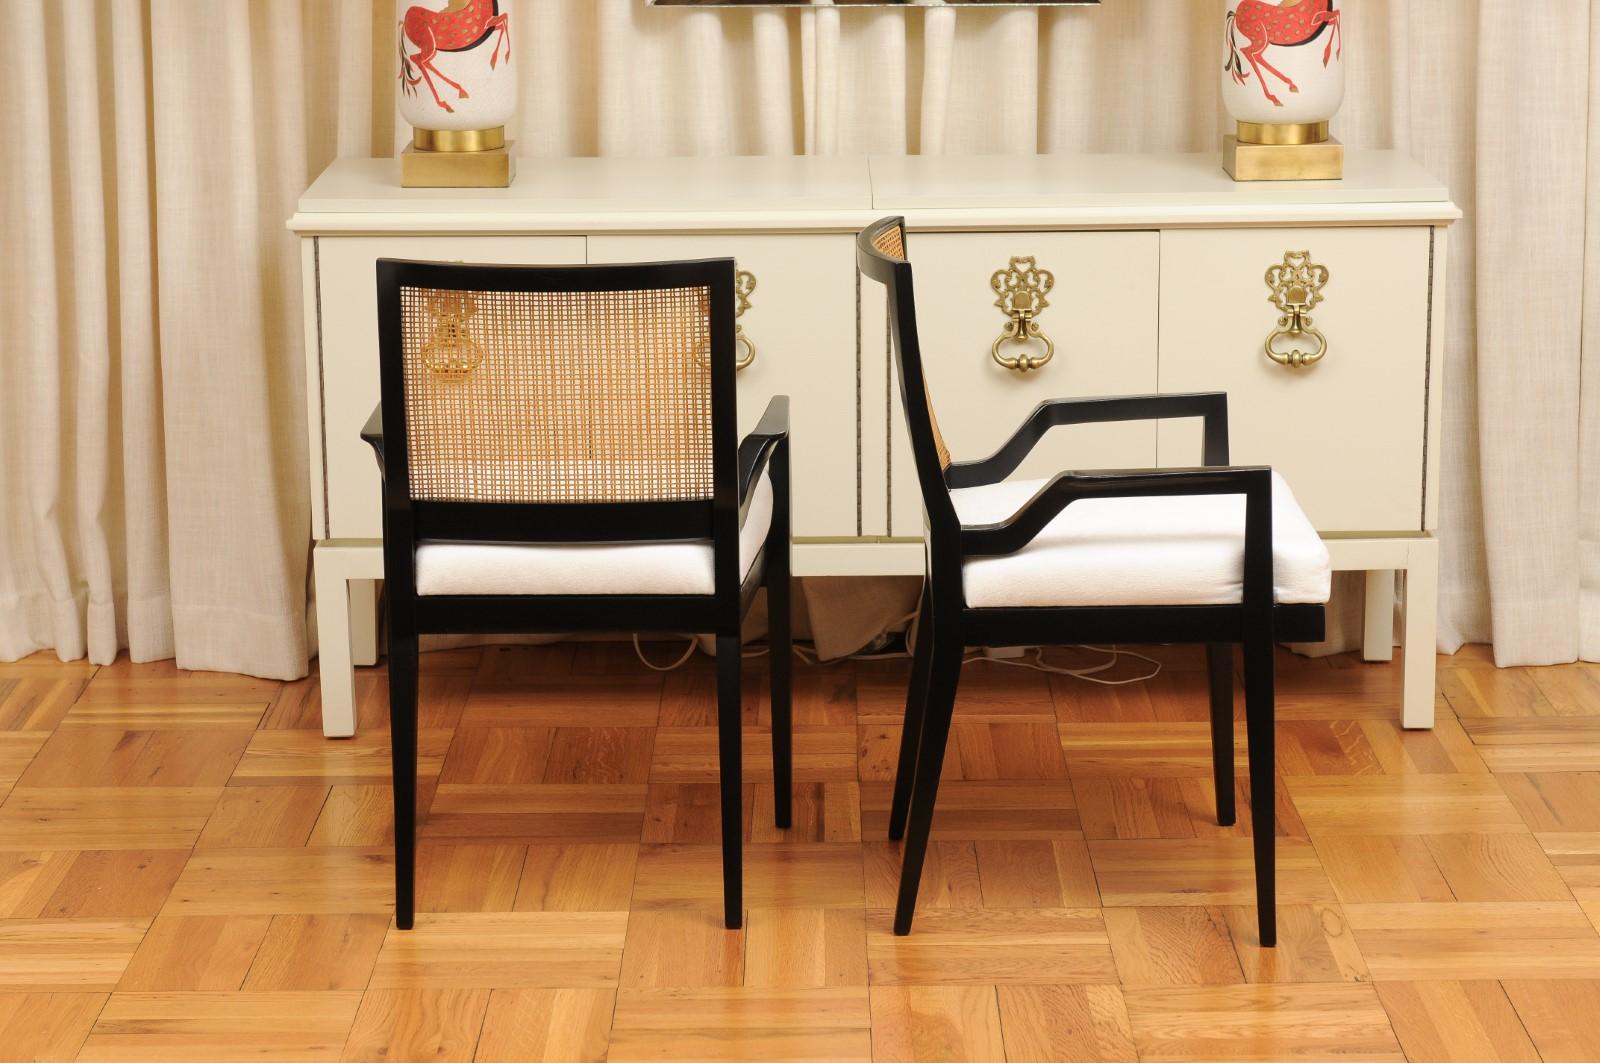 ALL ARMS Set of 8 Black Lacquer Cane Dining Chairs by Michael Taylor, circa 1960 For Sale 4